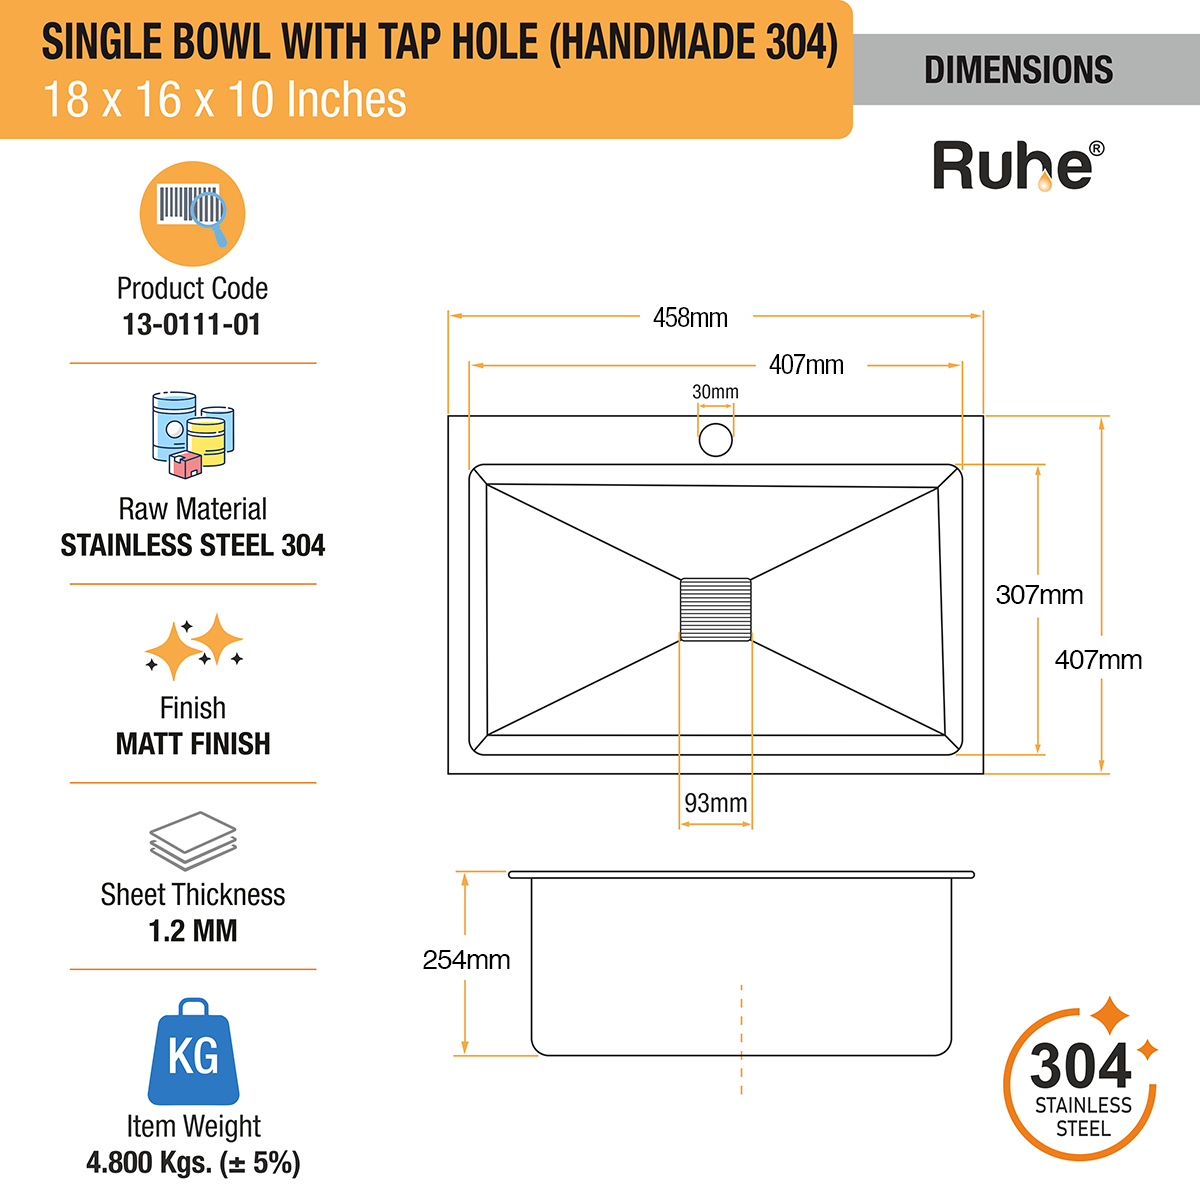 Handmade Single Bowl 304-Grade Kitchen Sink (18 x 16 x 10 Inches) with Tap Hole dimensions and sizes